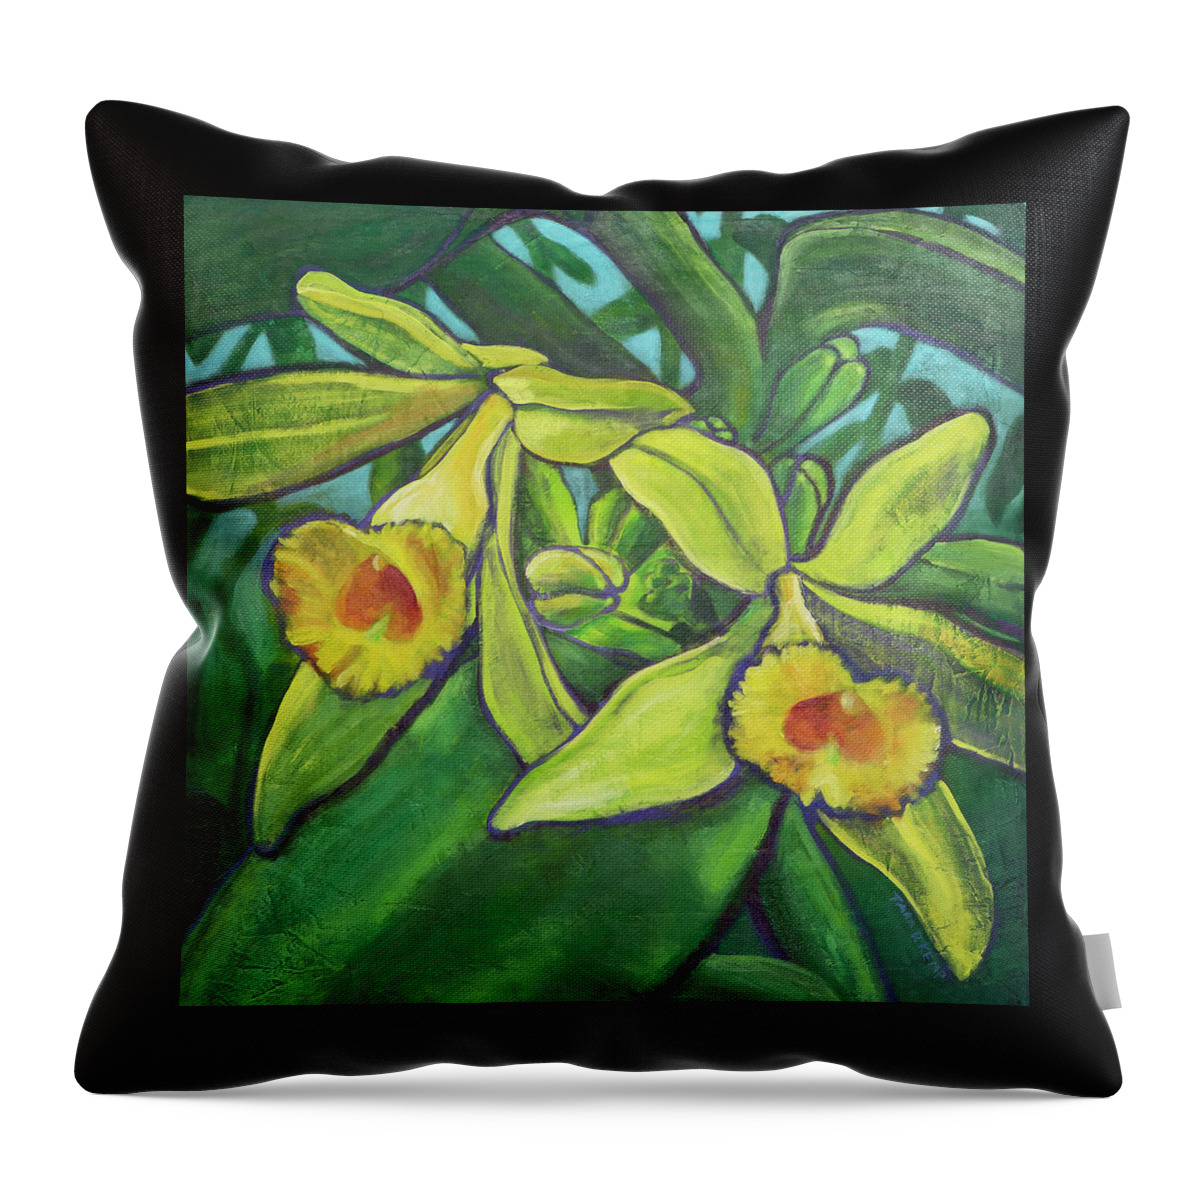 Coconut Bliss Throw Pillow featuring the painting Blissful Vanilla Orchids by Tara D Kemp